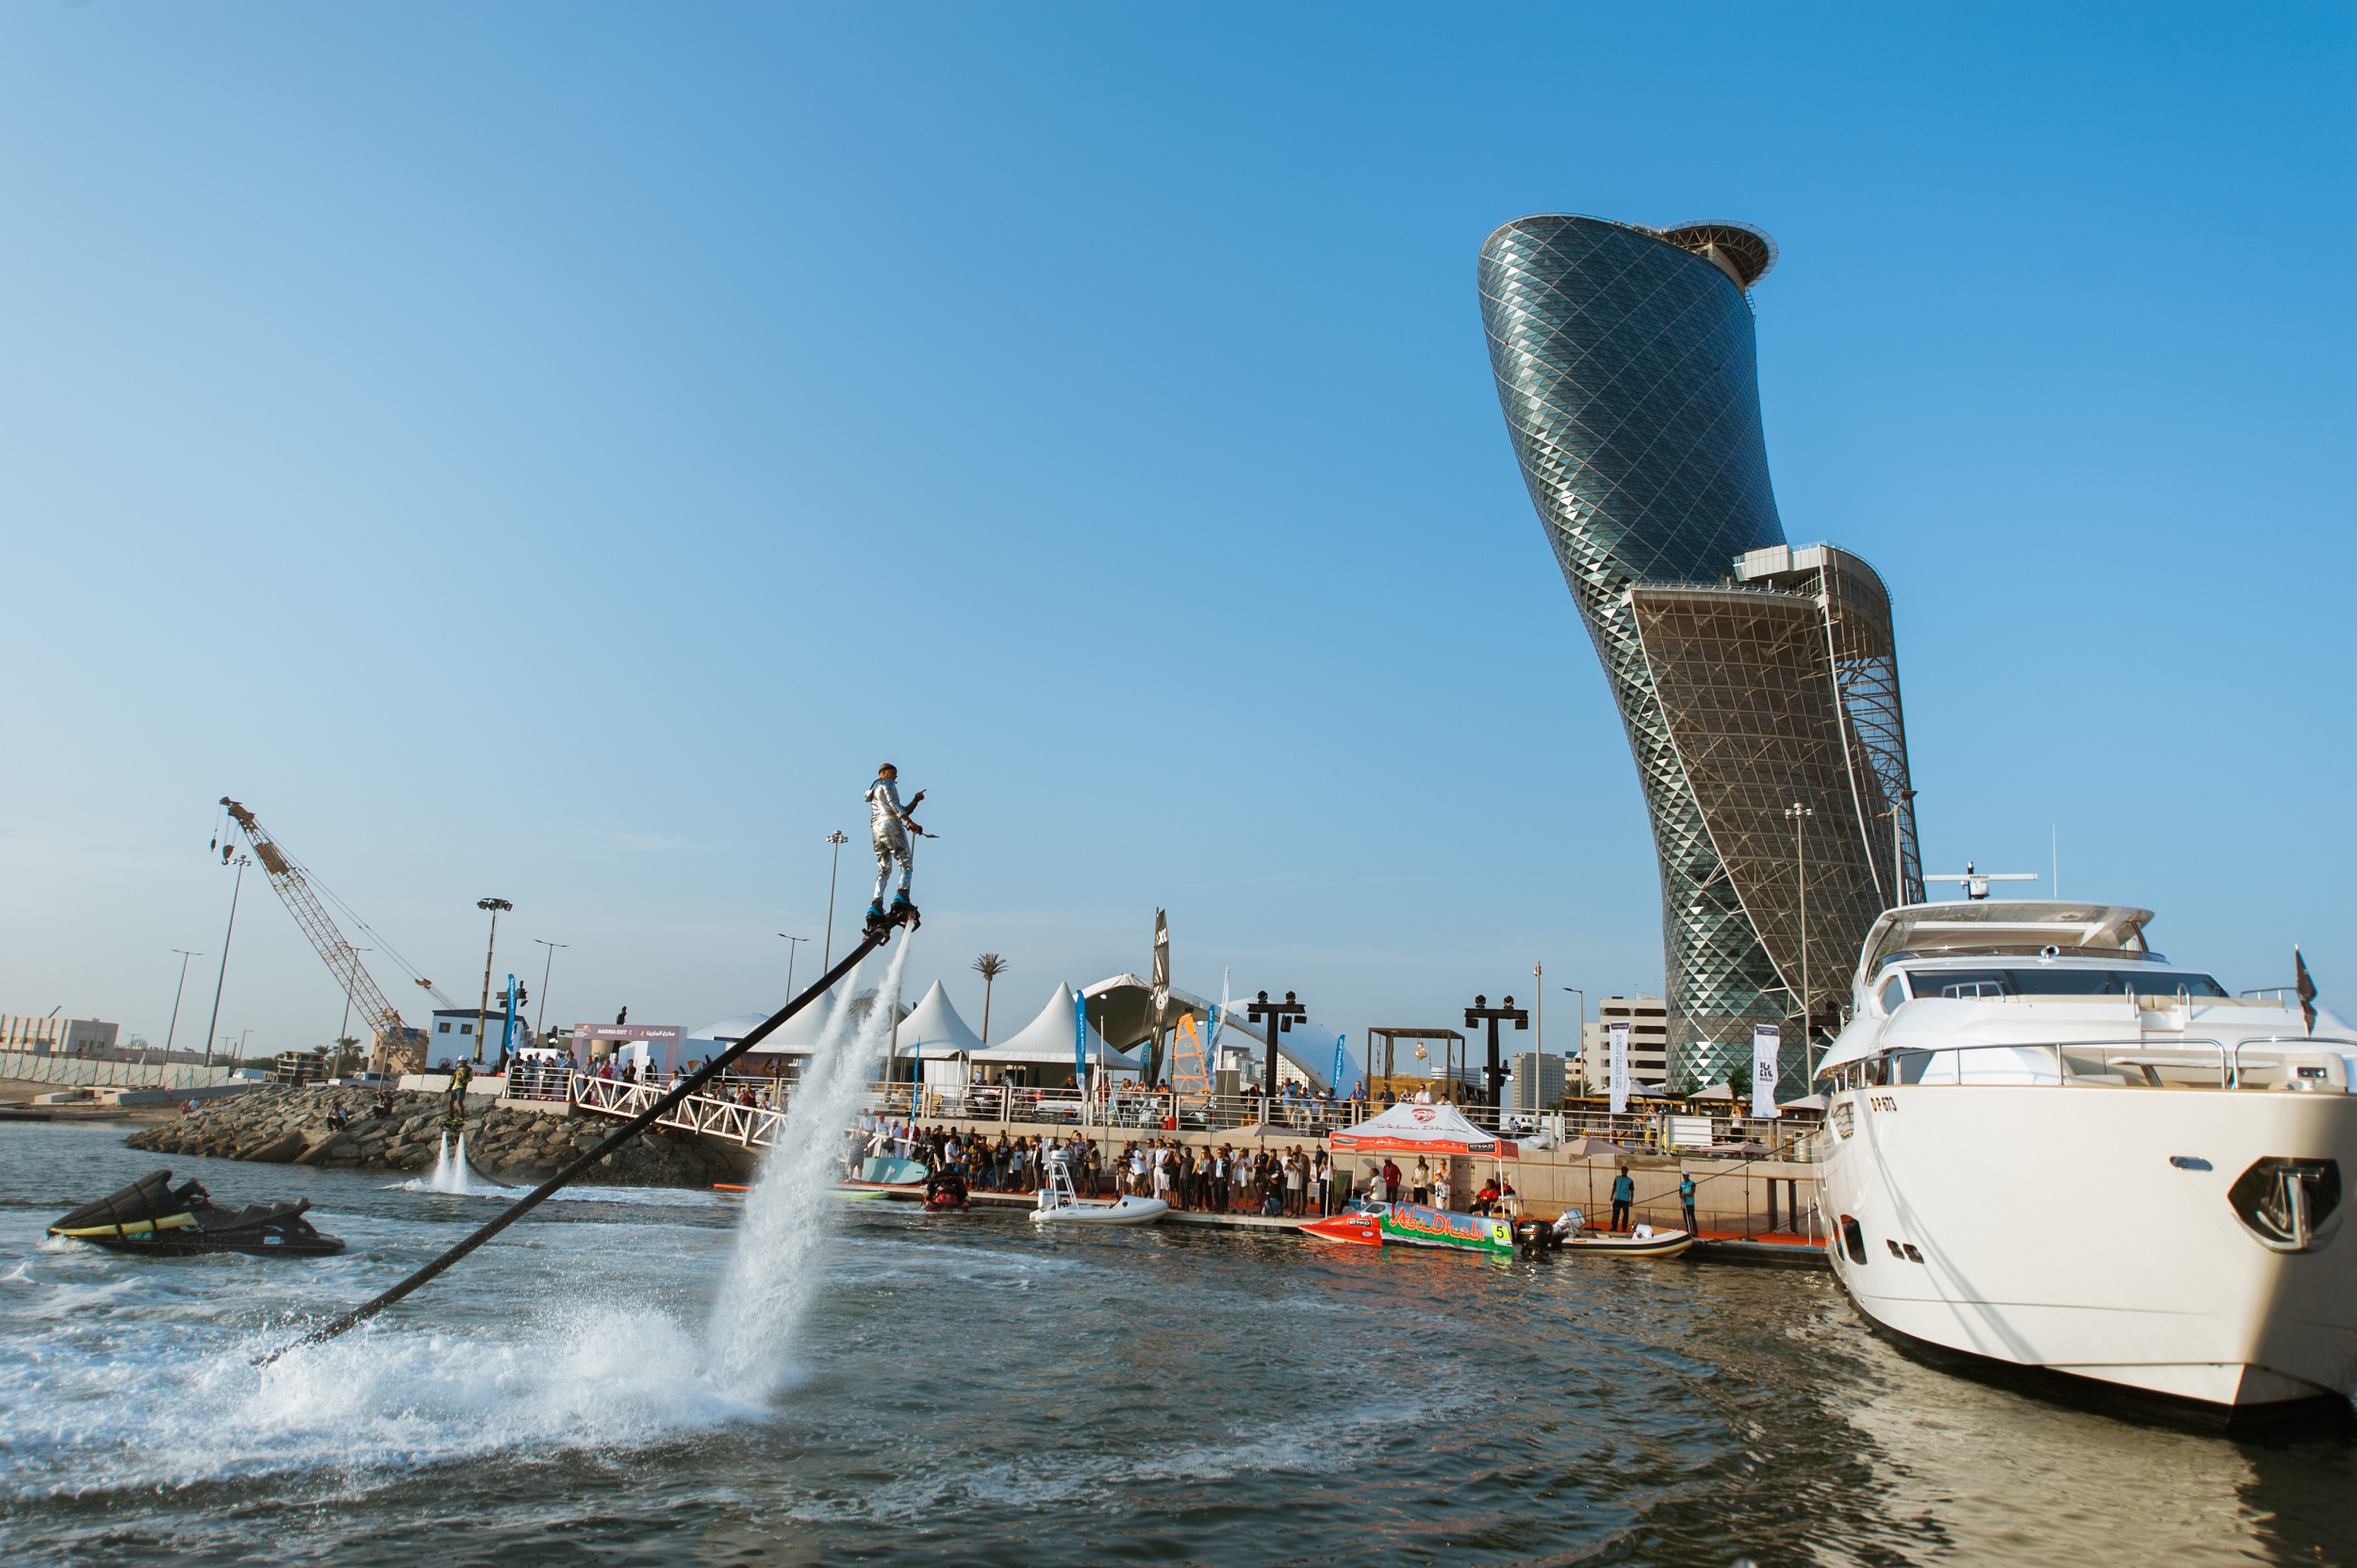 The 3rd Abu Dhabi International Boat Show will be held in October 2021